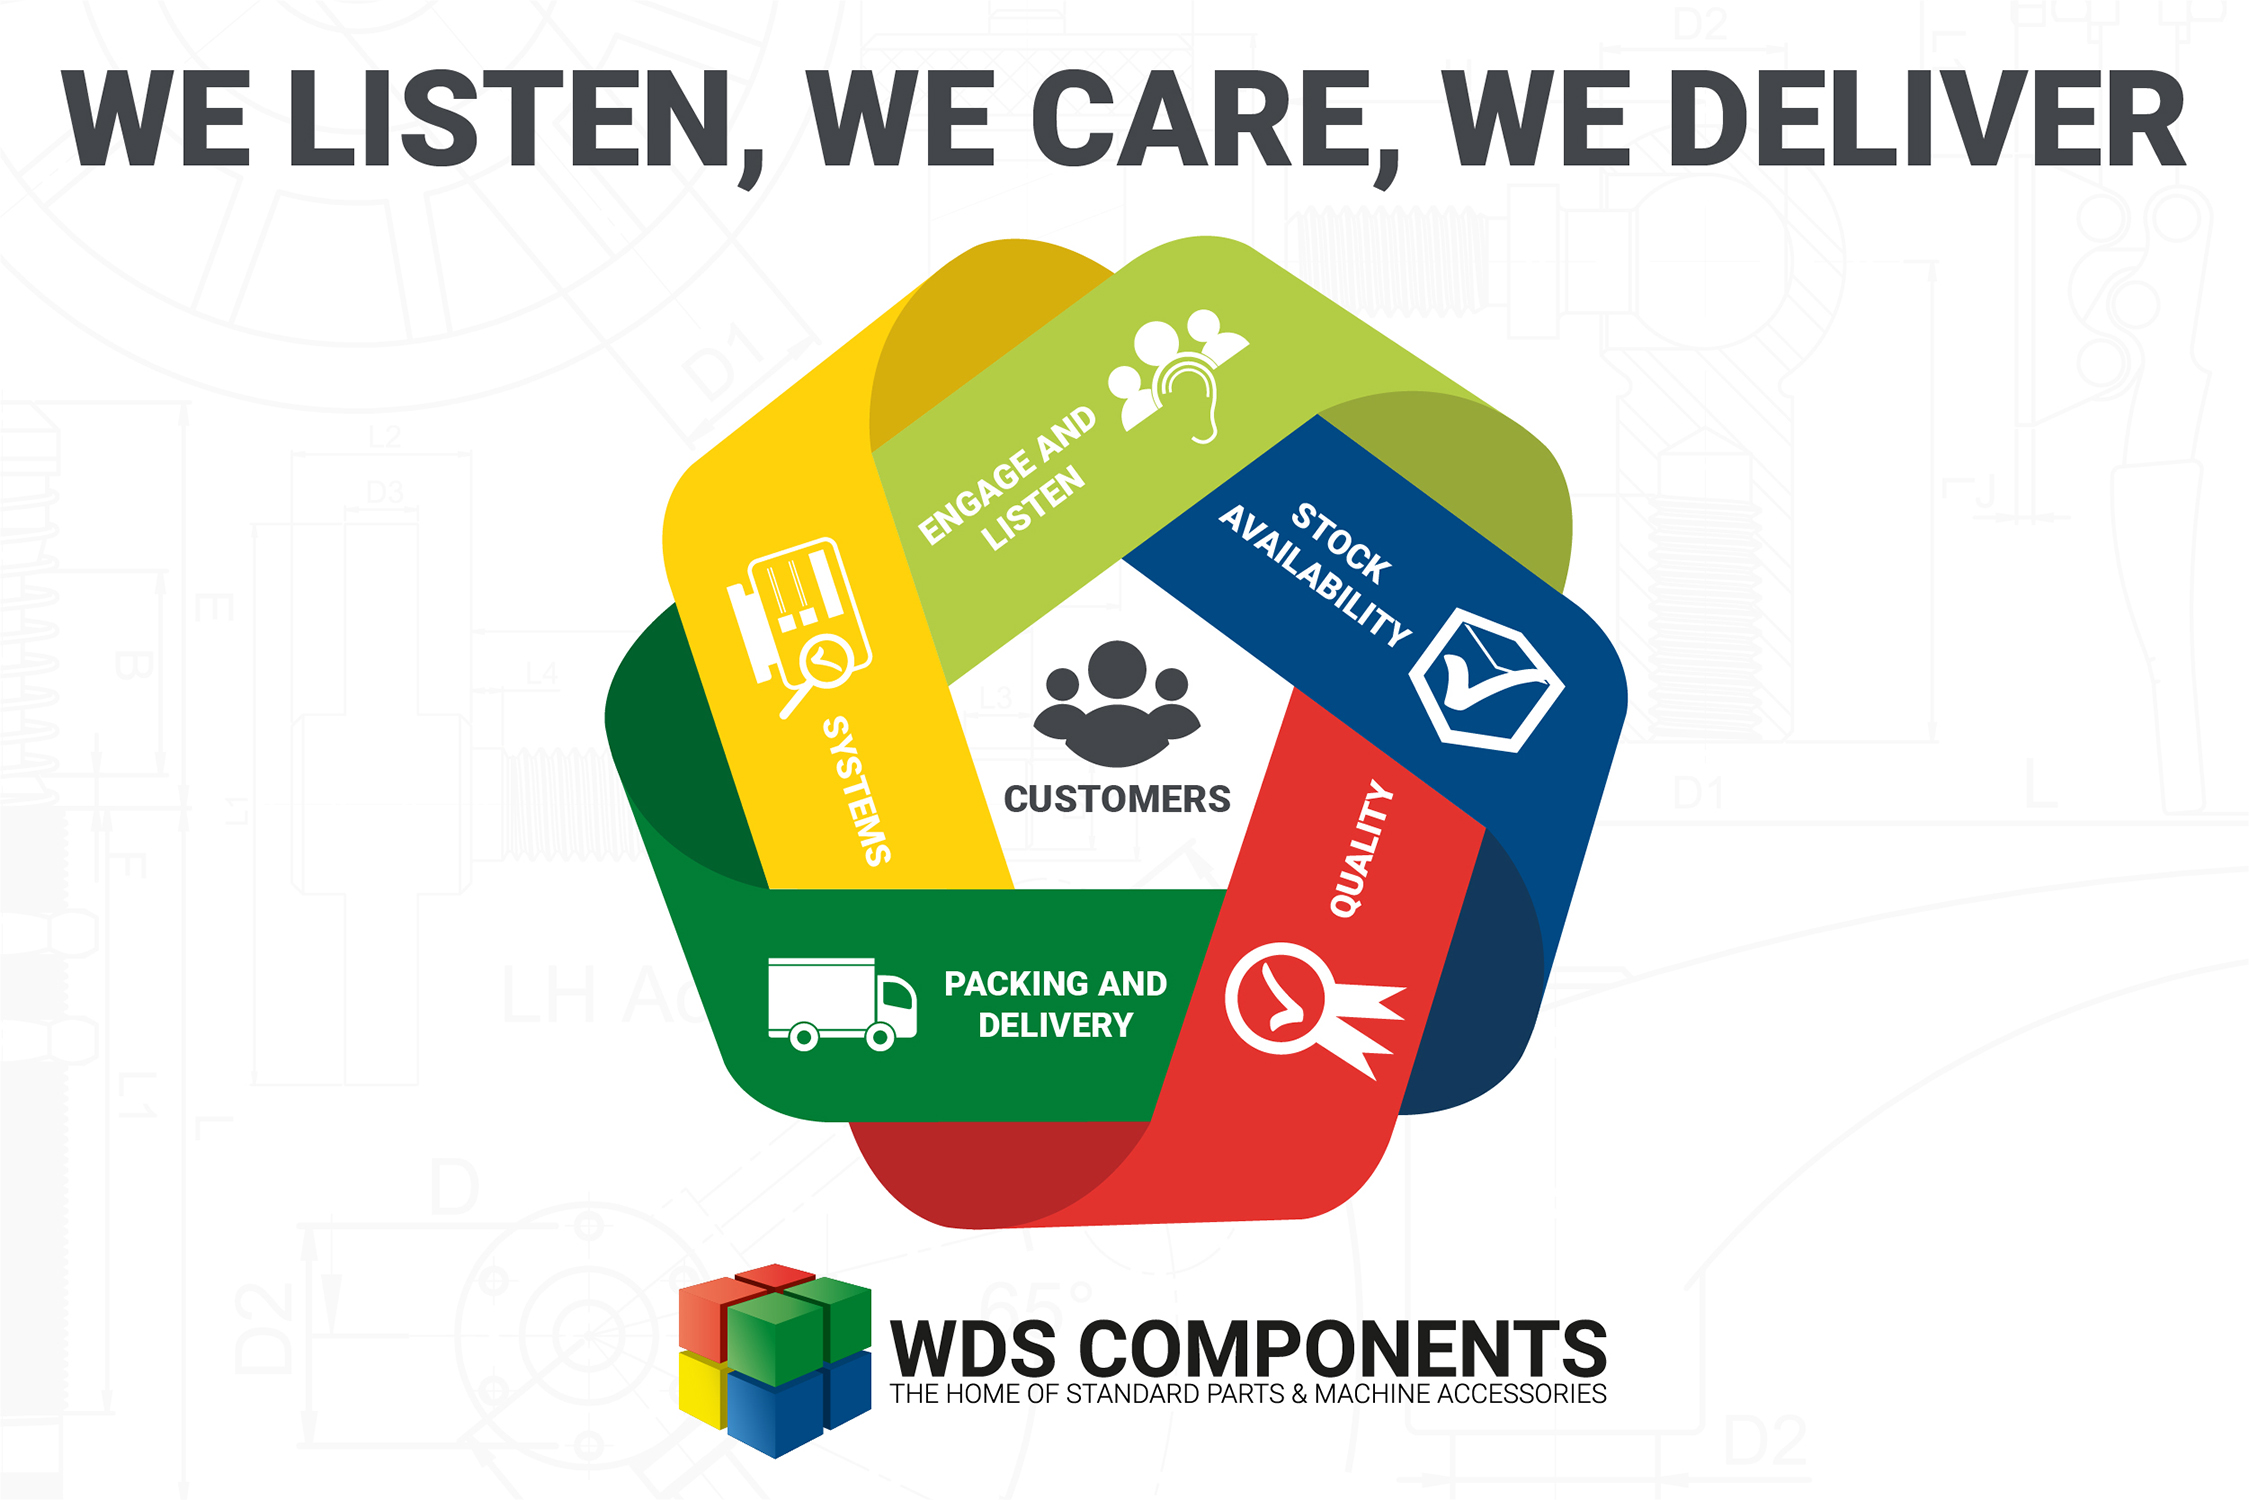 WDS core values: Engage and Listen, Stock Availability, Quality, Packaging and Delivery, Systems.